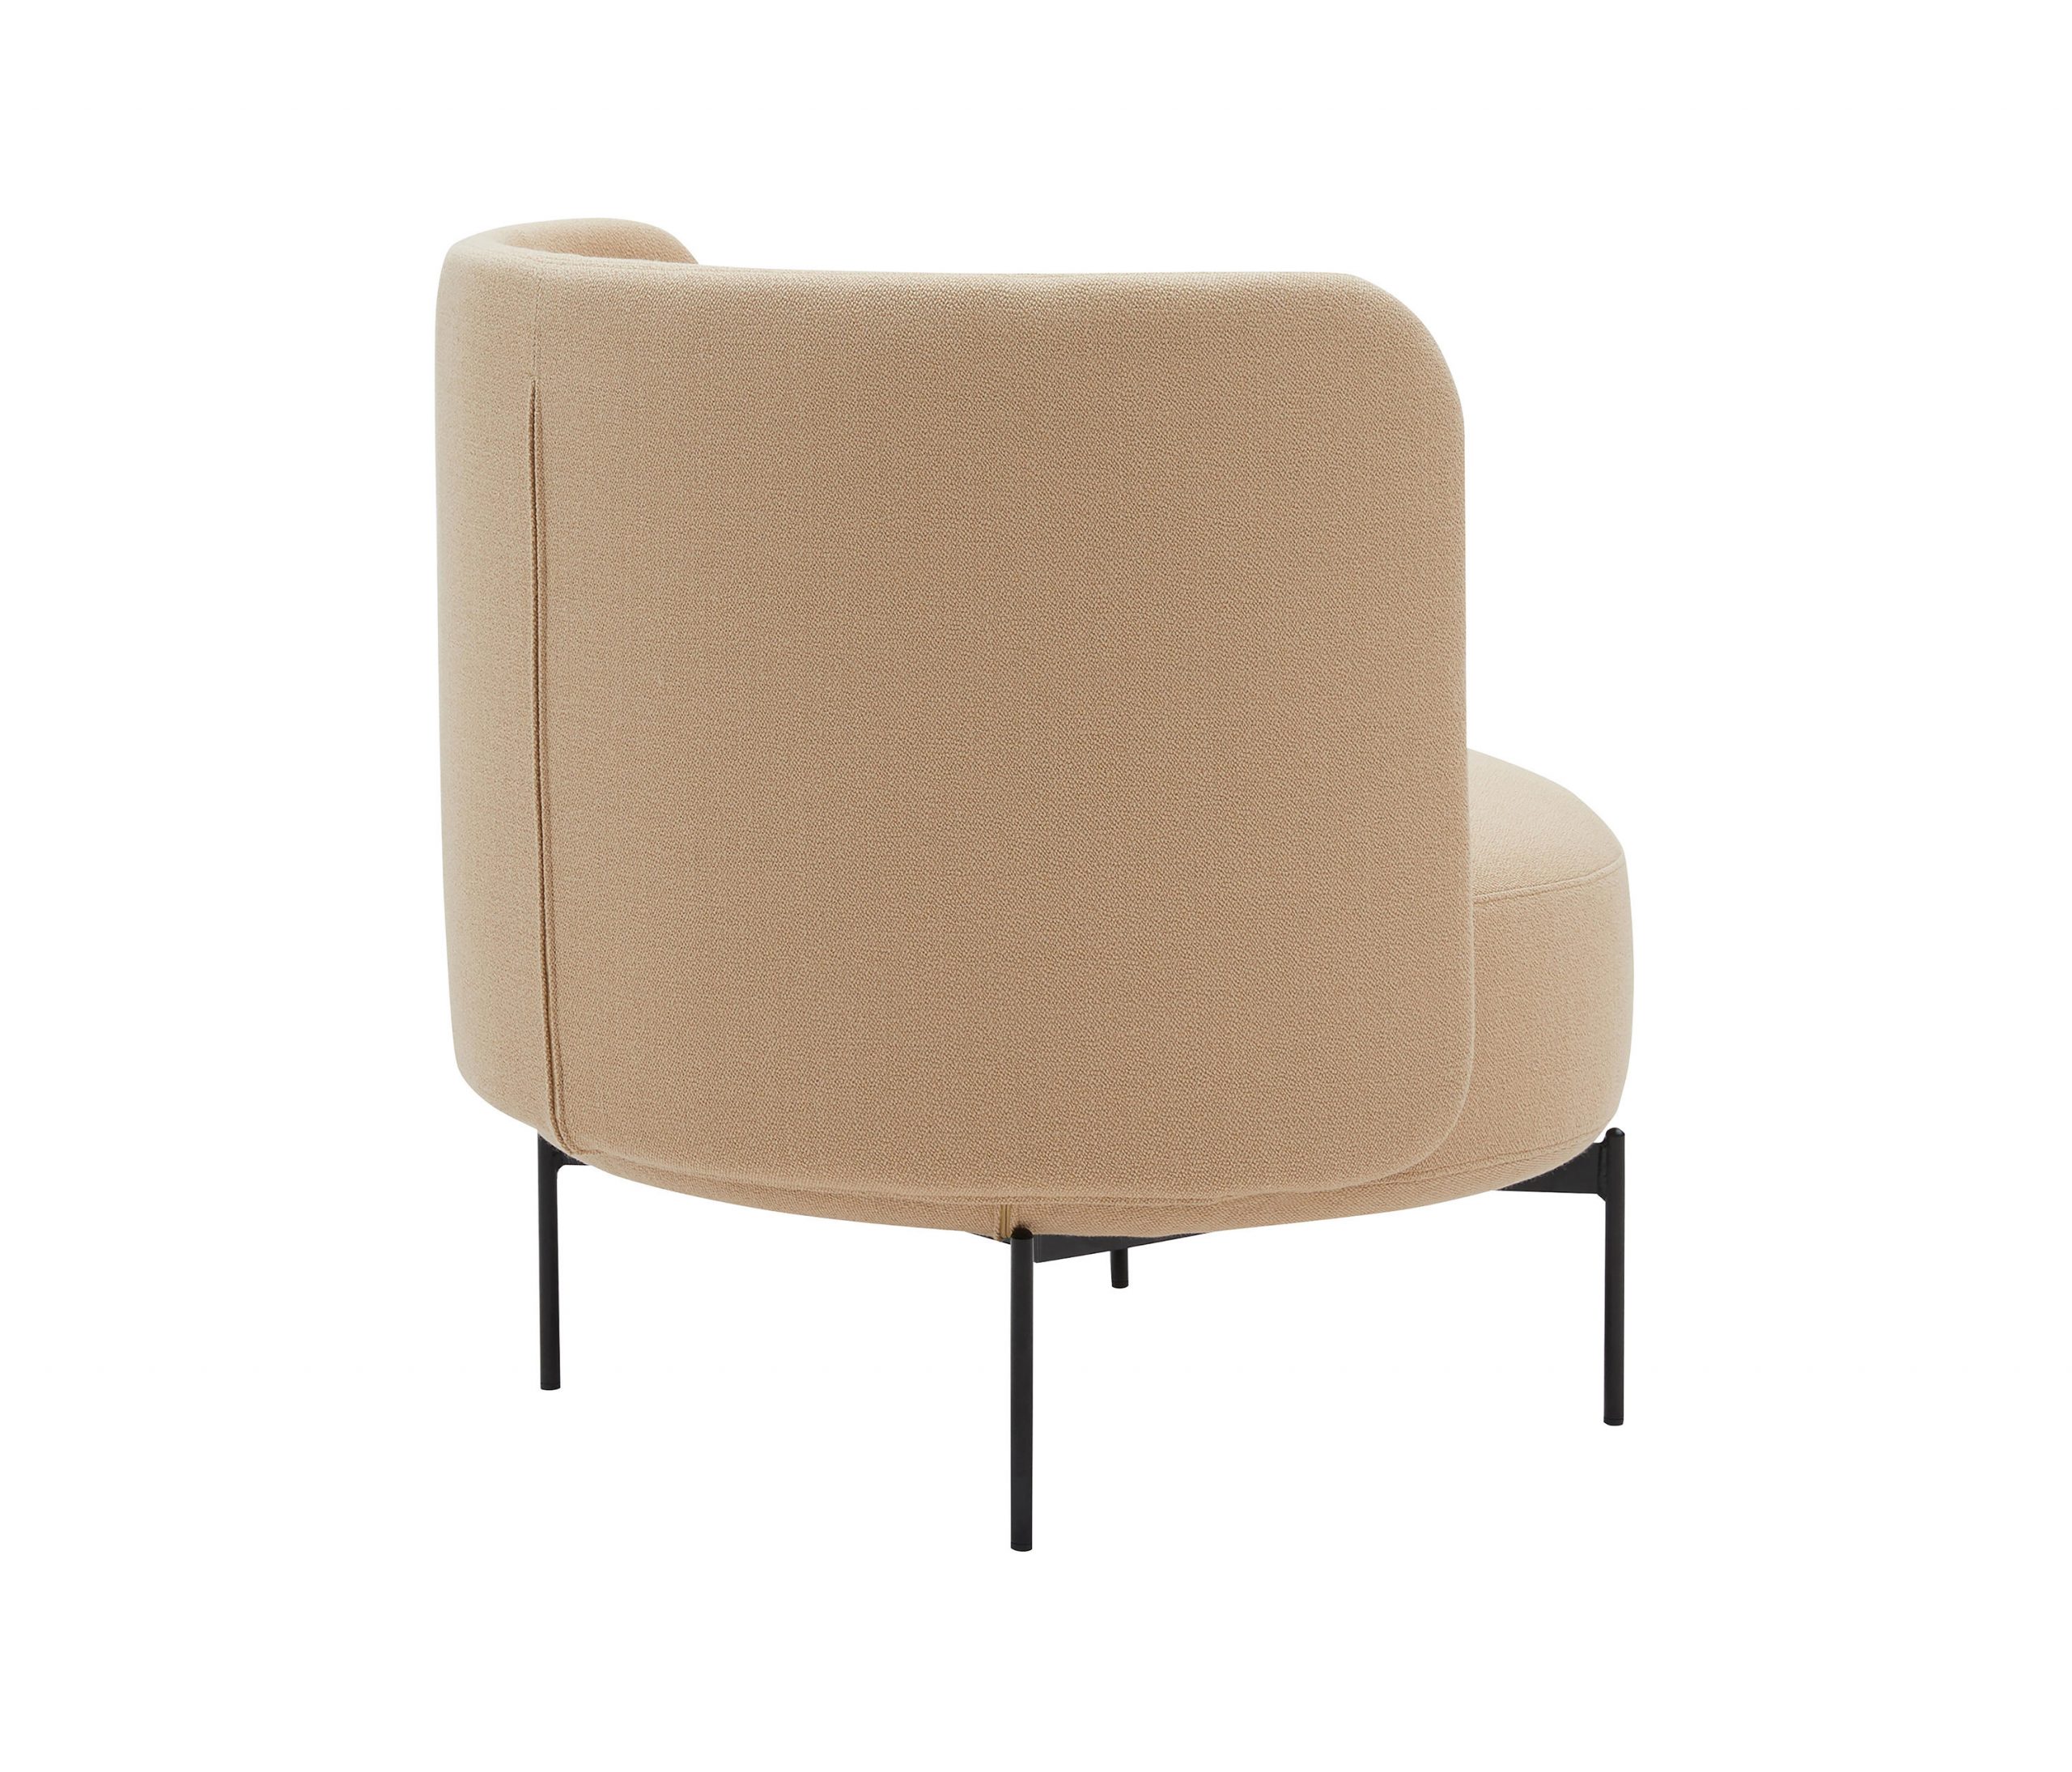 JOE Seating Collection by Böttcher & Kayser for Softline